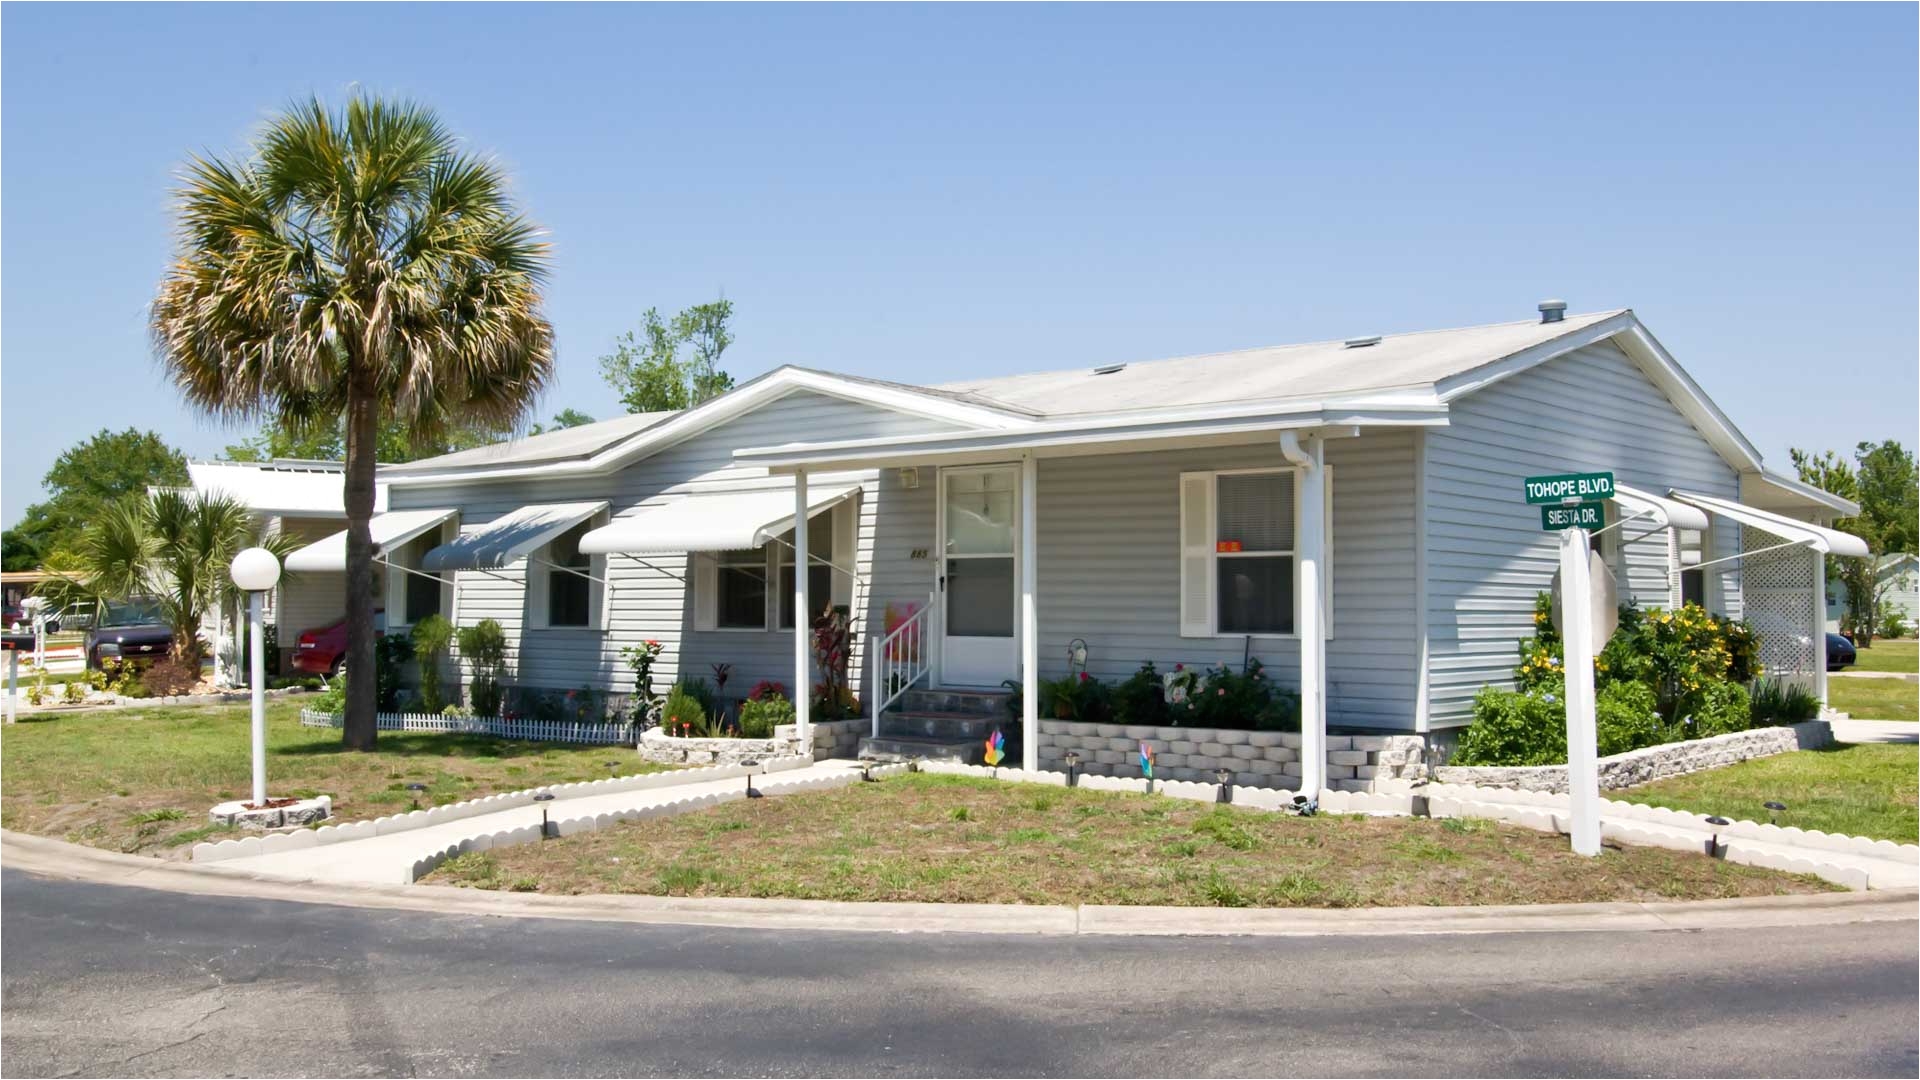 charming furnished mobile homes for rent in florida or jennifer bryant wilmington nc realtor info